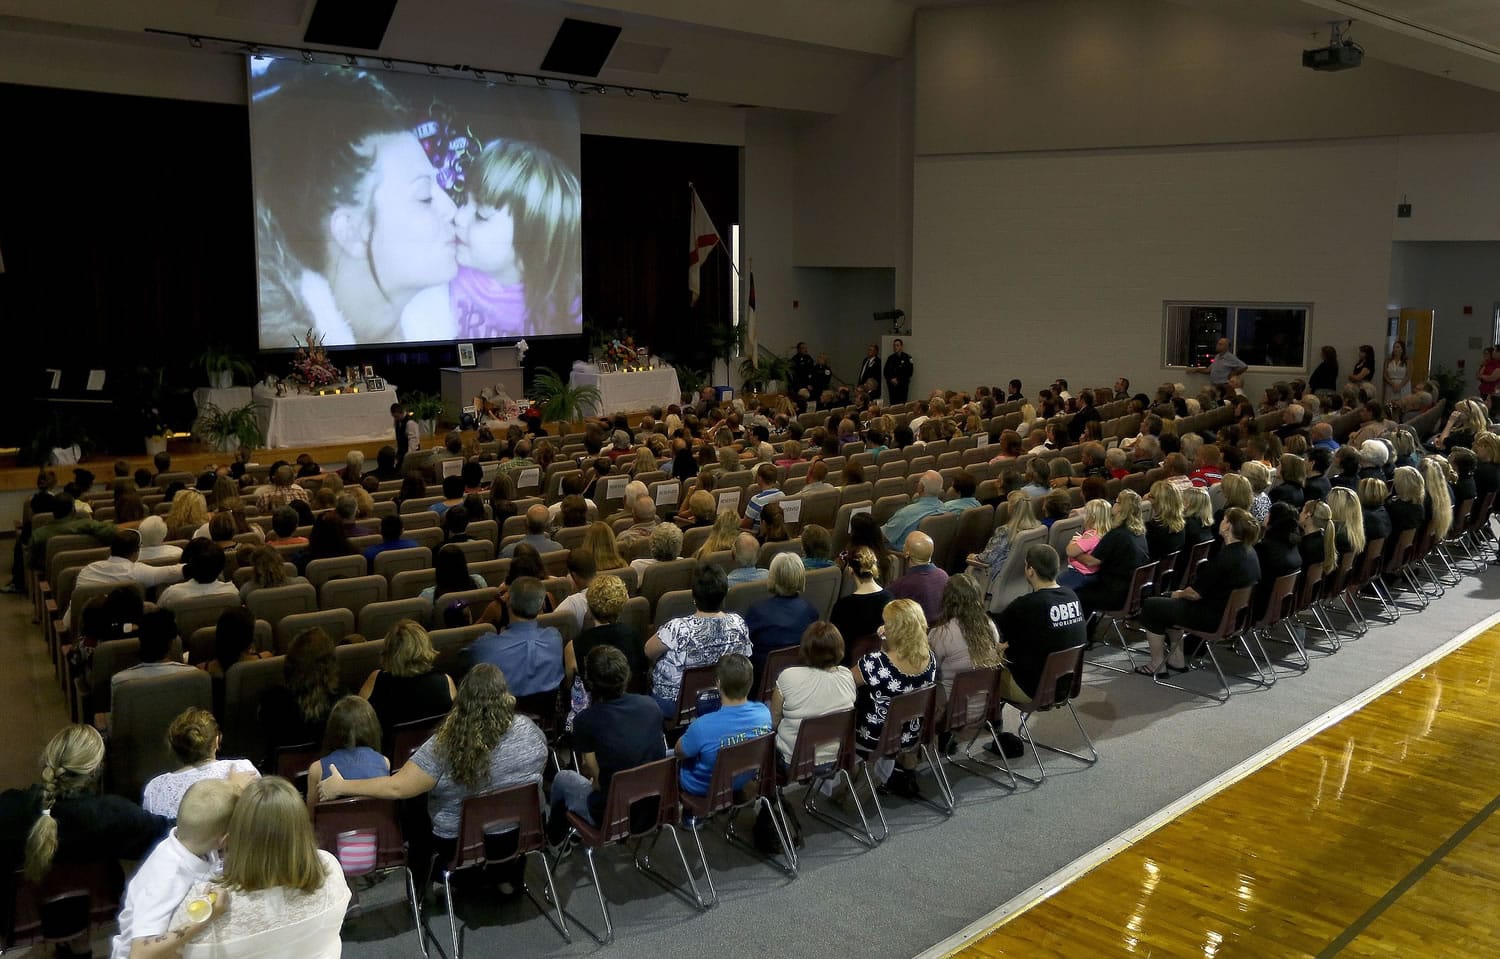 Images of Sarah Spirit and her children are displayed on a screen during a Memorial service at Bell High School in Bell, Fla., on Sept.